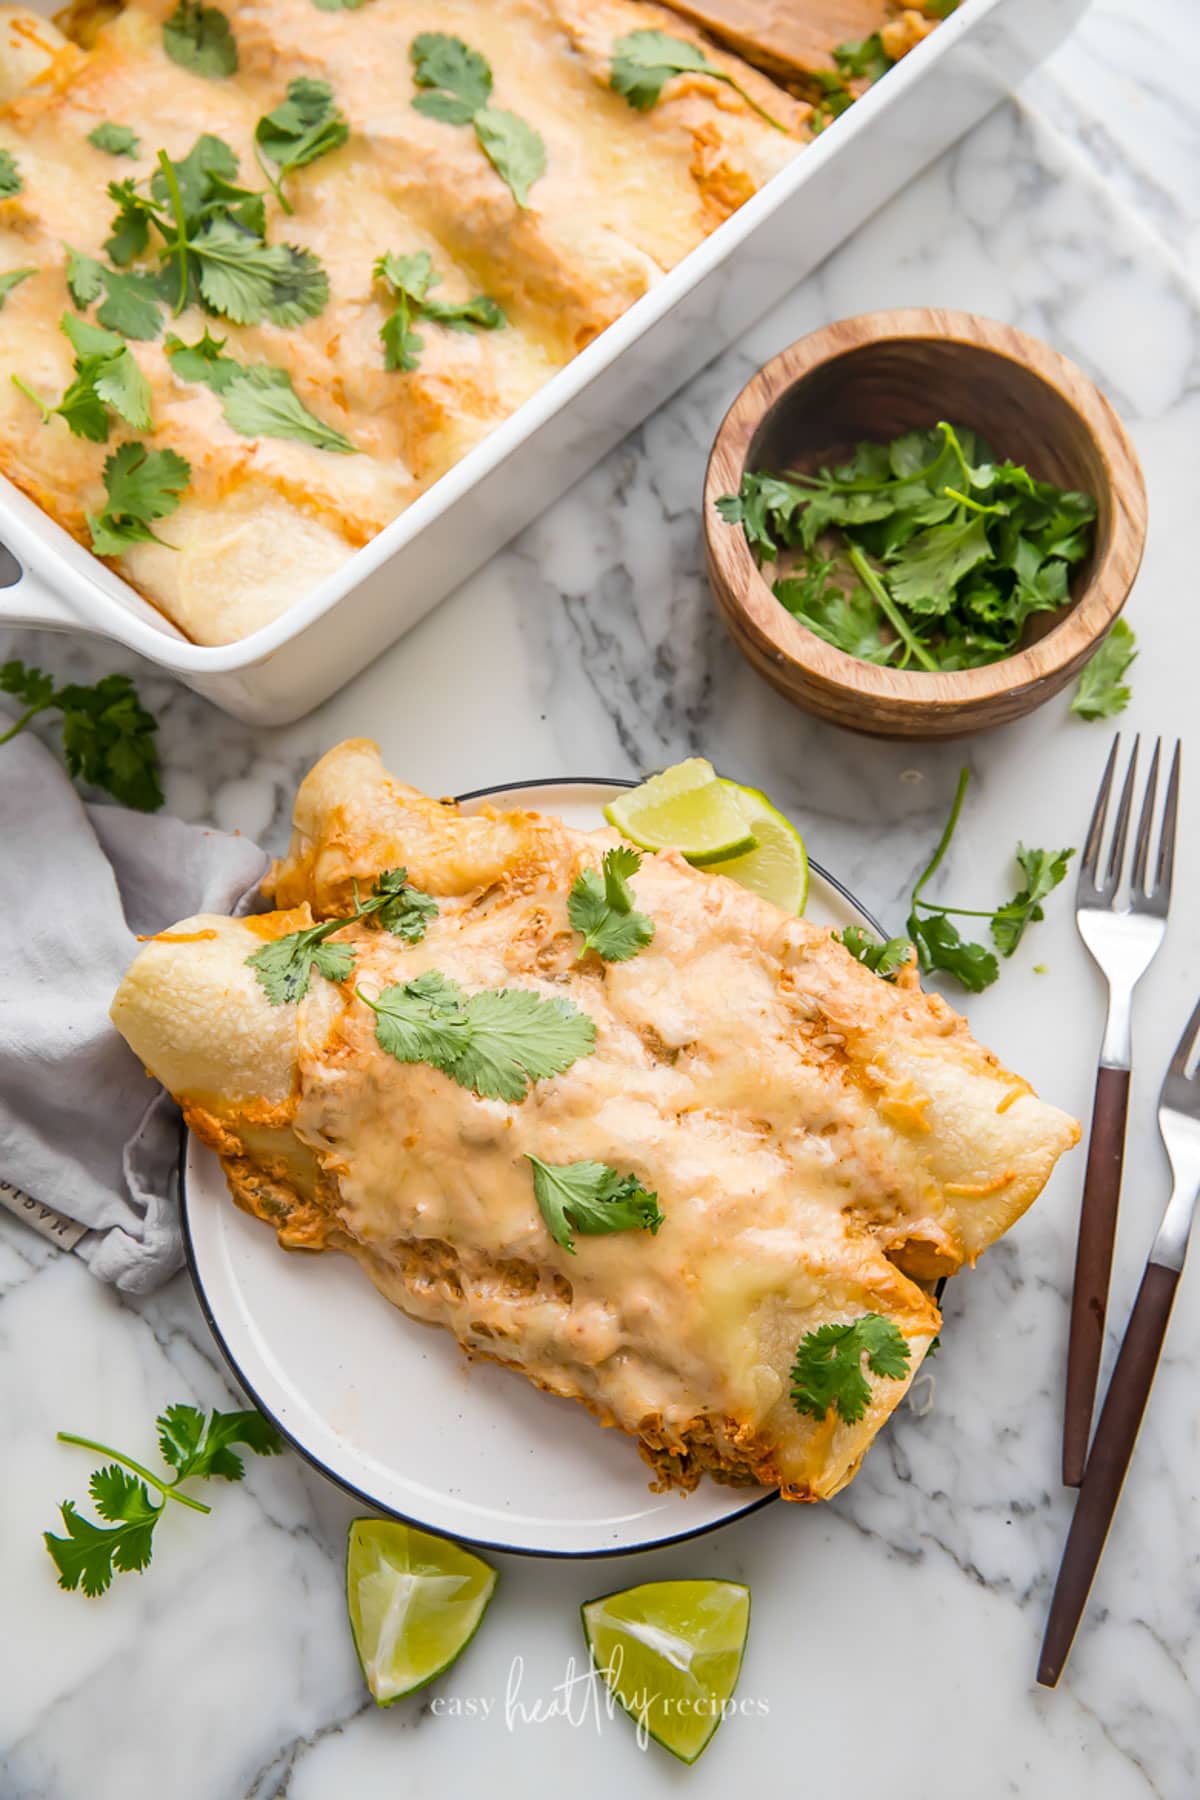 Two chicken enchiladas on a small white plate, next to a casserole dish of chicken enchiladas on a neutral light tabletop.